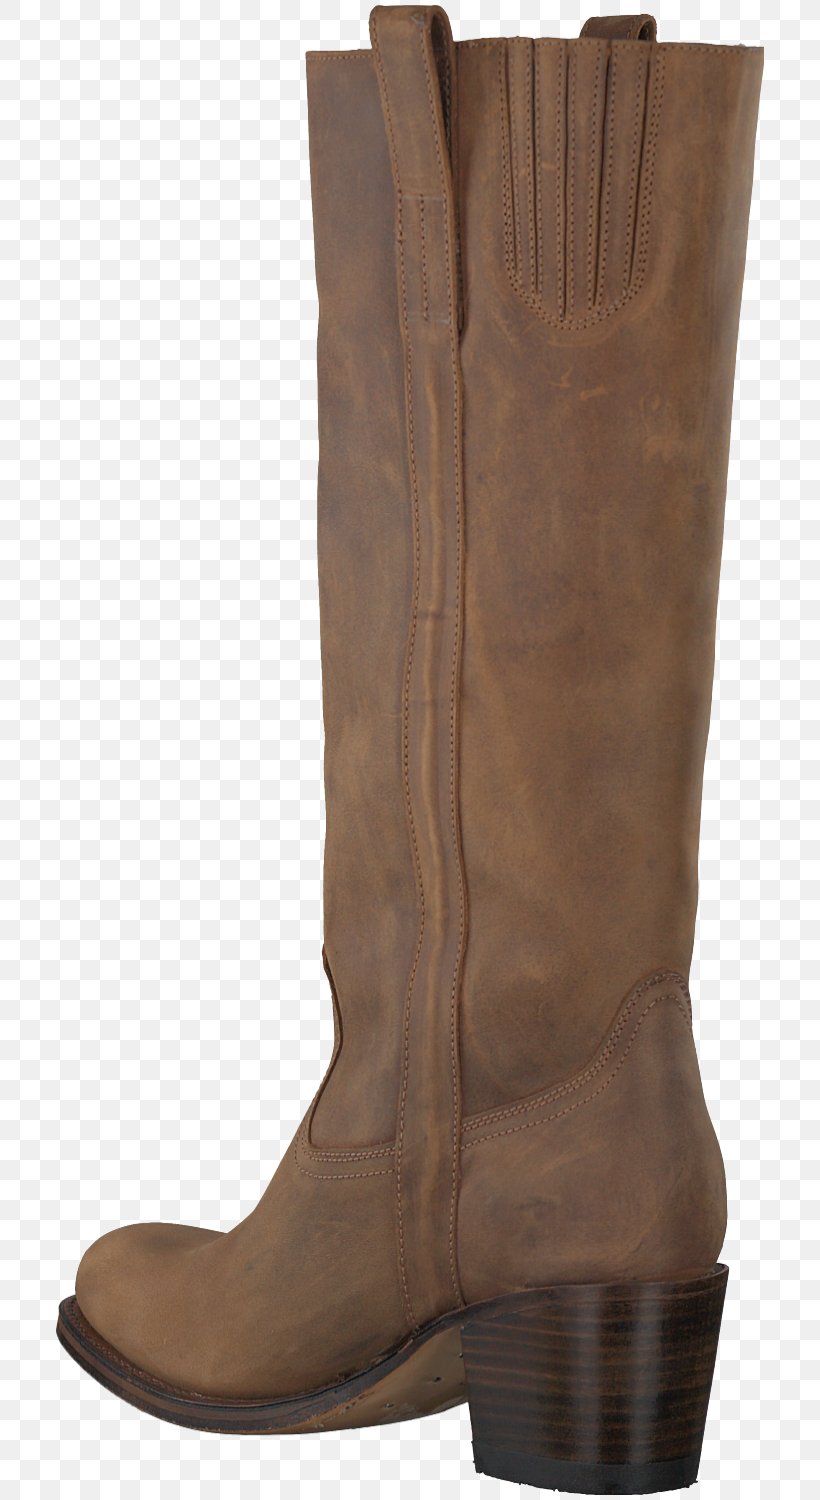 Cowboy Boot Shoe Riding Boot Footwear, PNG, 718x1500px, Boot, Beige, Brown, Cowboy, Cowboy Boot Download Free